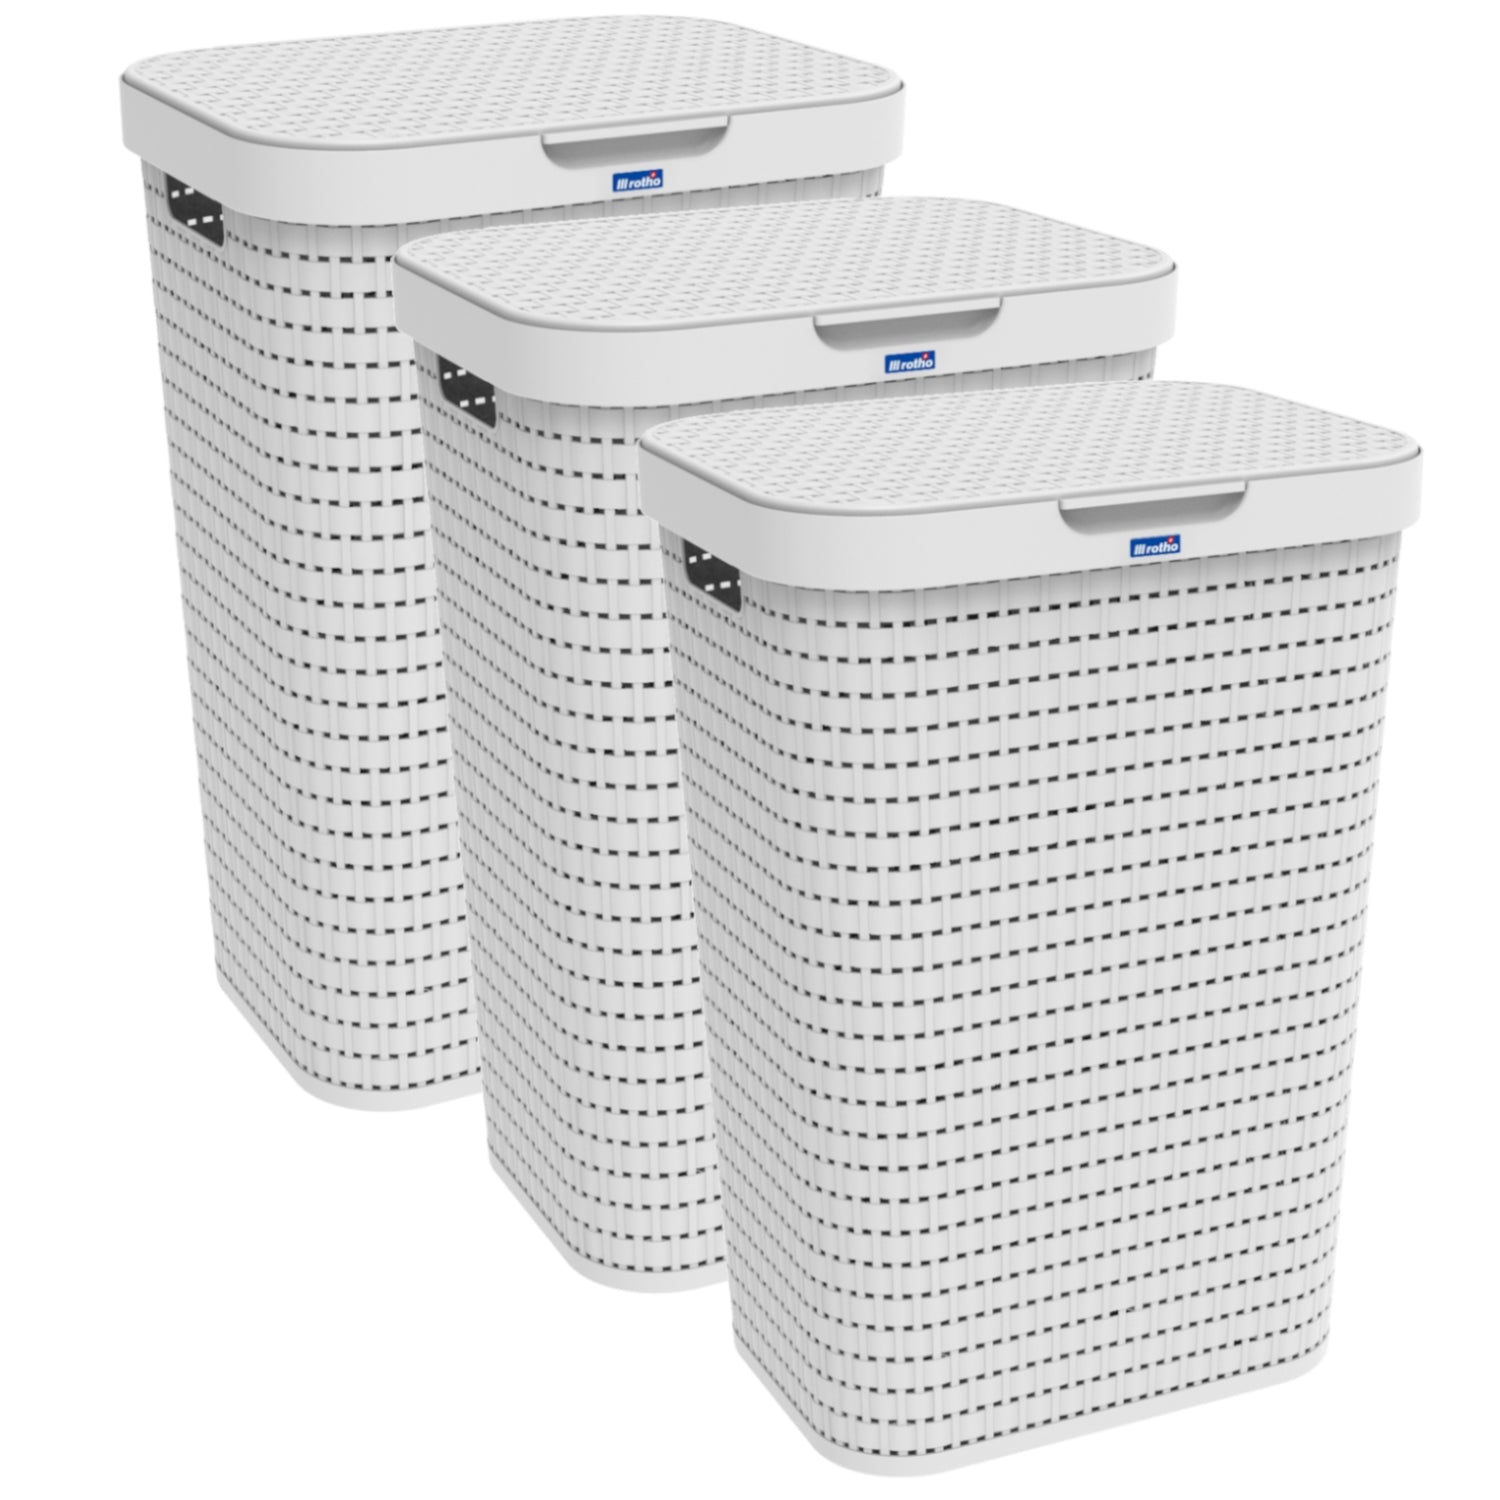 Laundy Basket 3pc Set with Lid 55L l COUNTRY